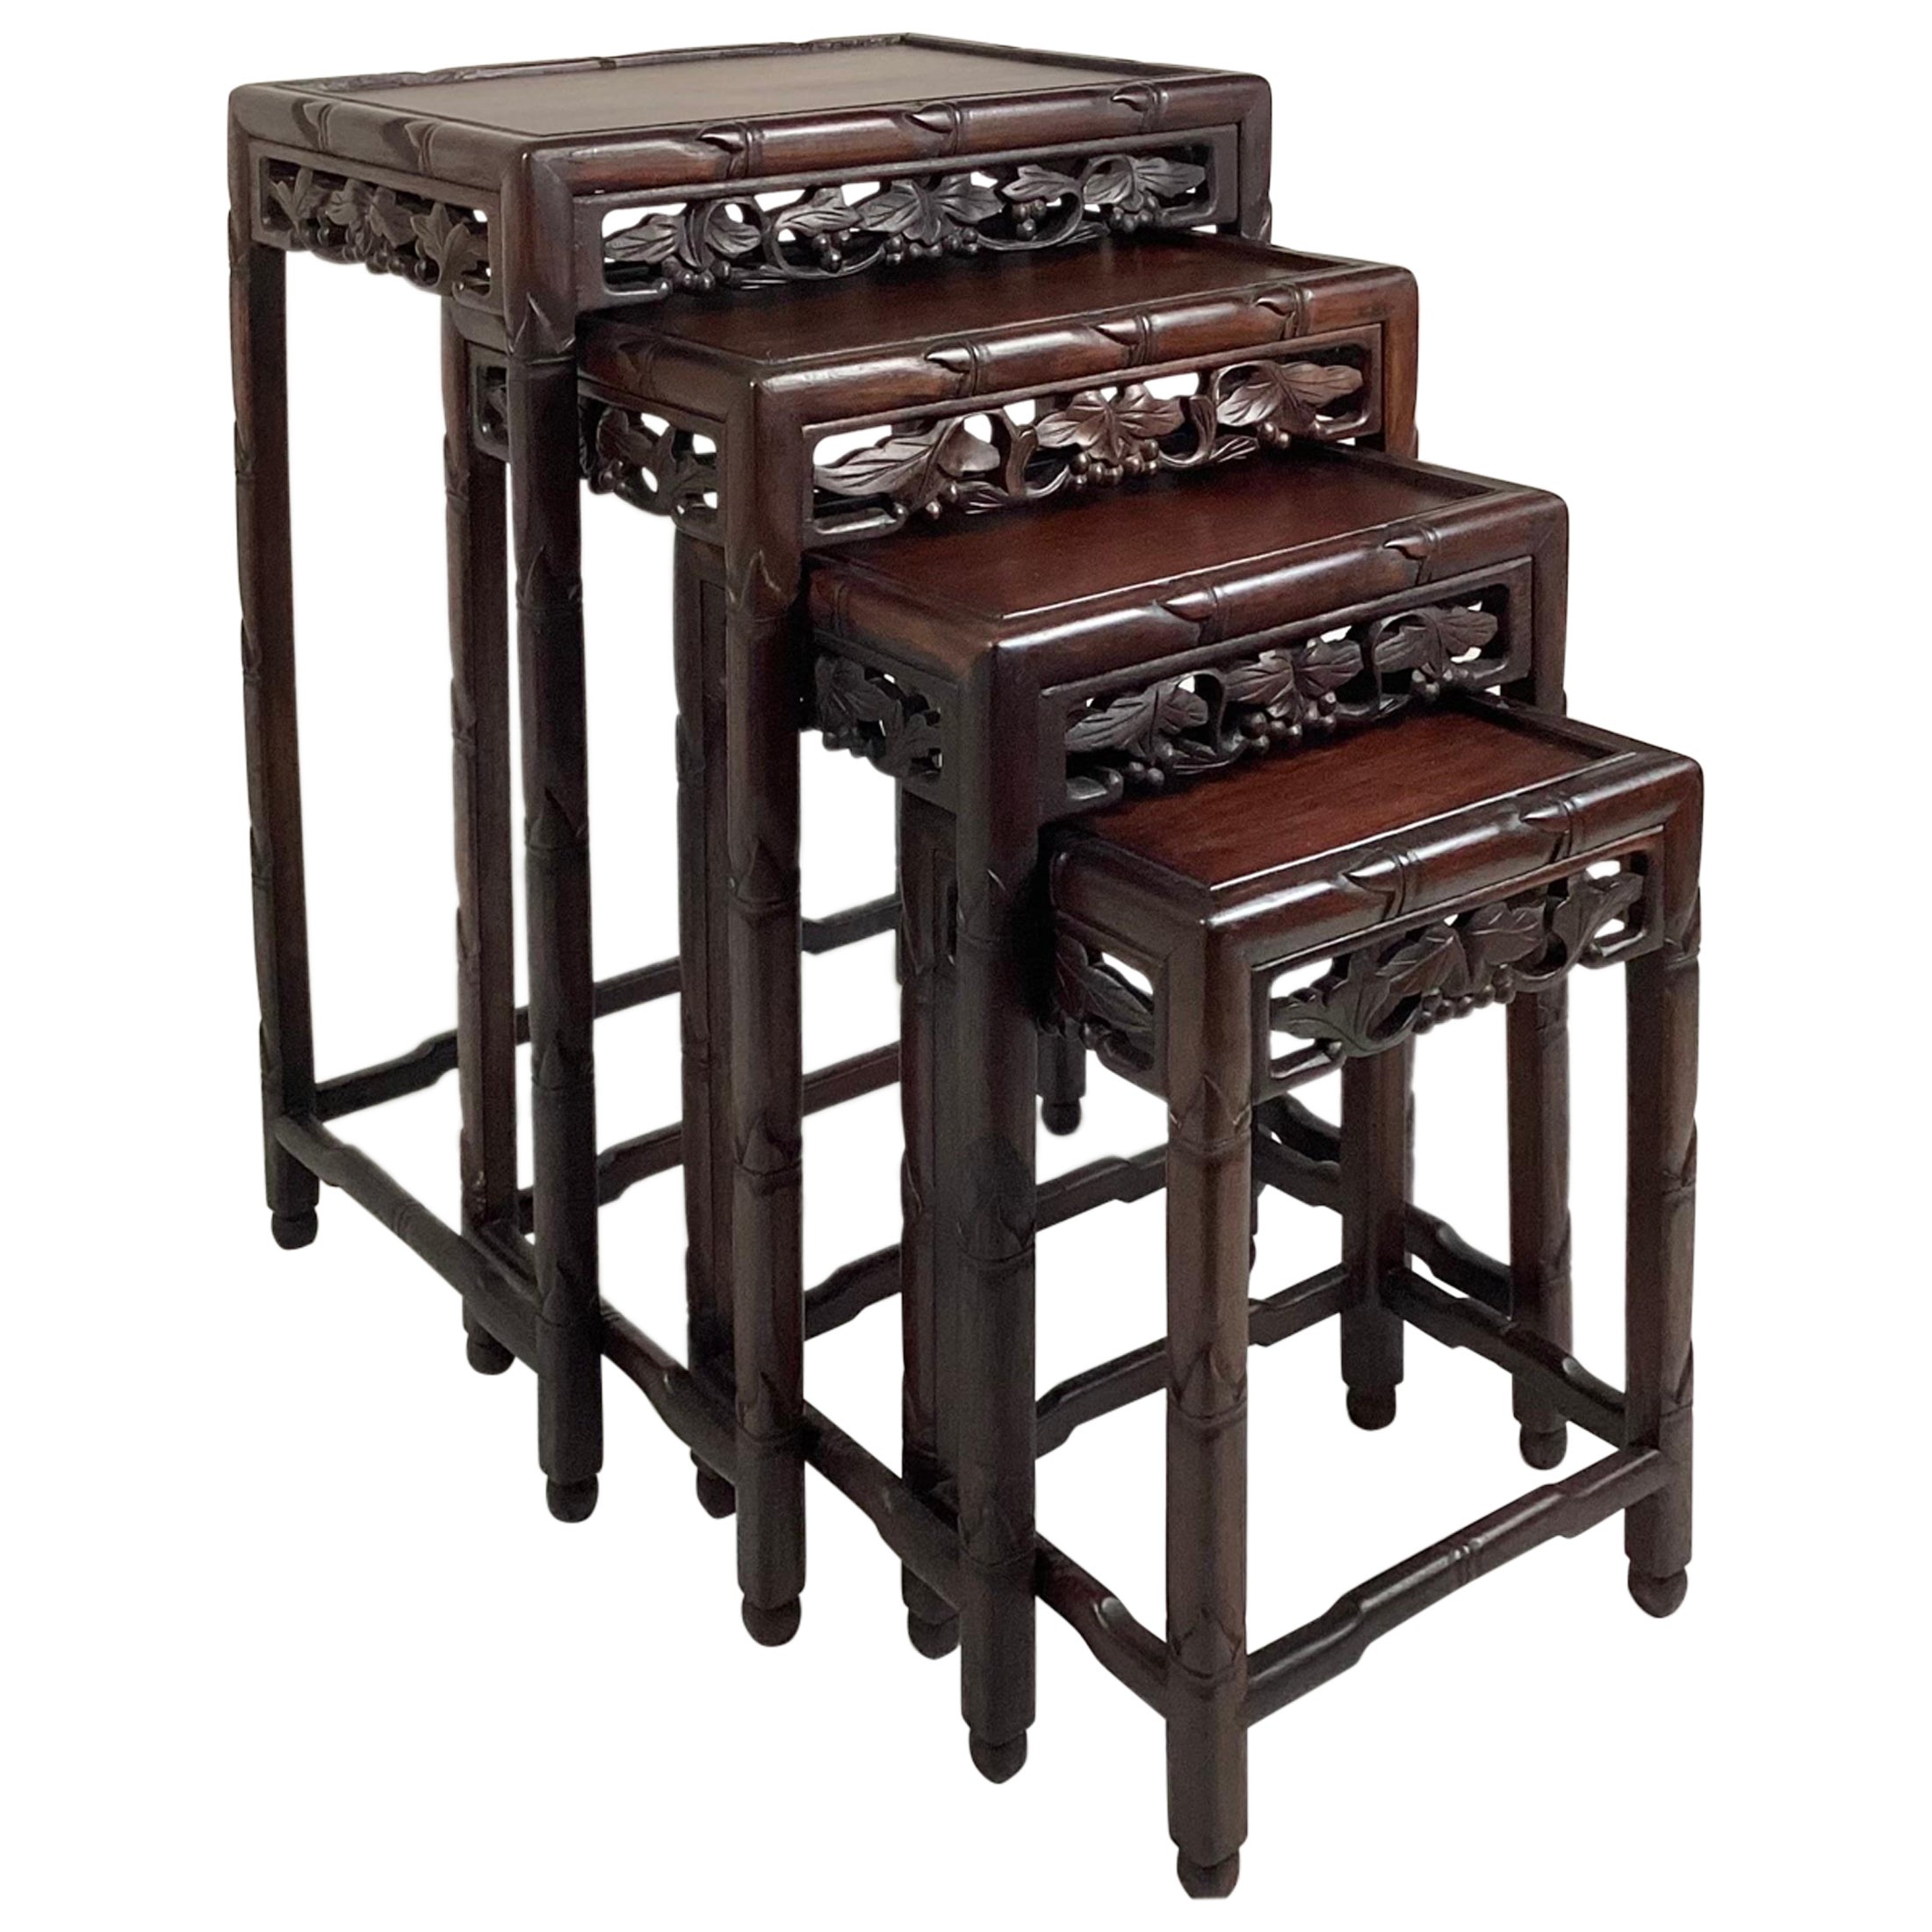 Chinese Rosewood Set of 4 Nesting Tables with Carved Frieze Decoration